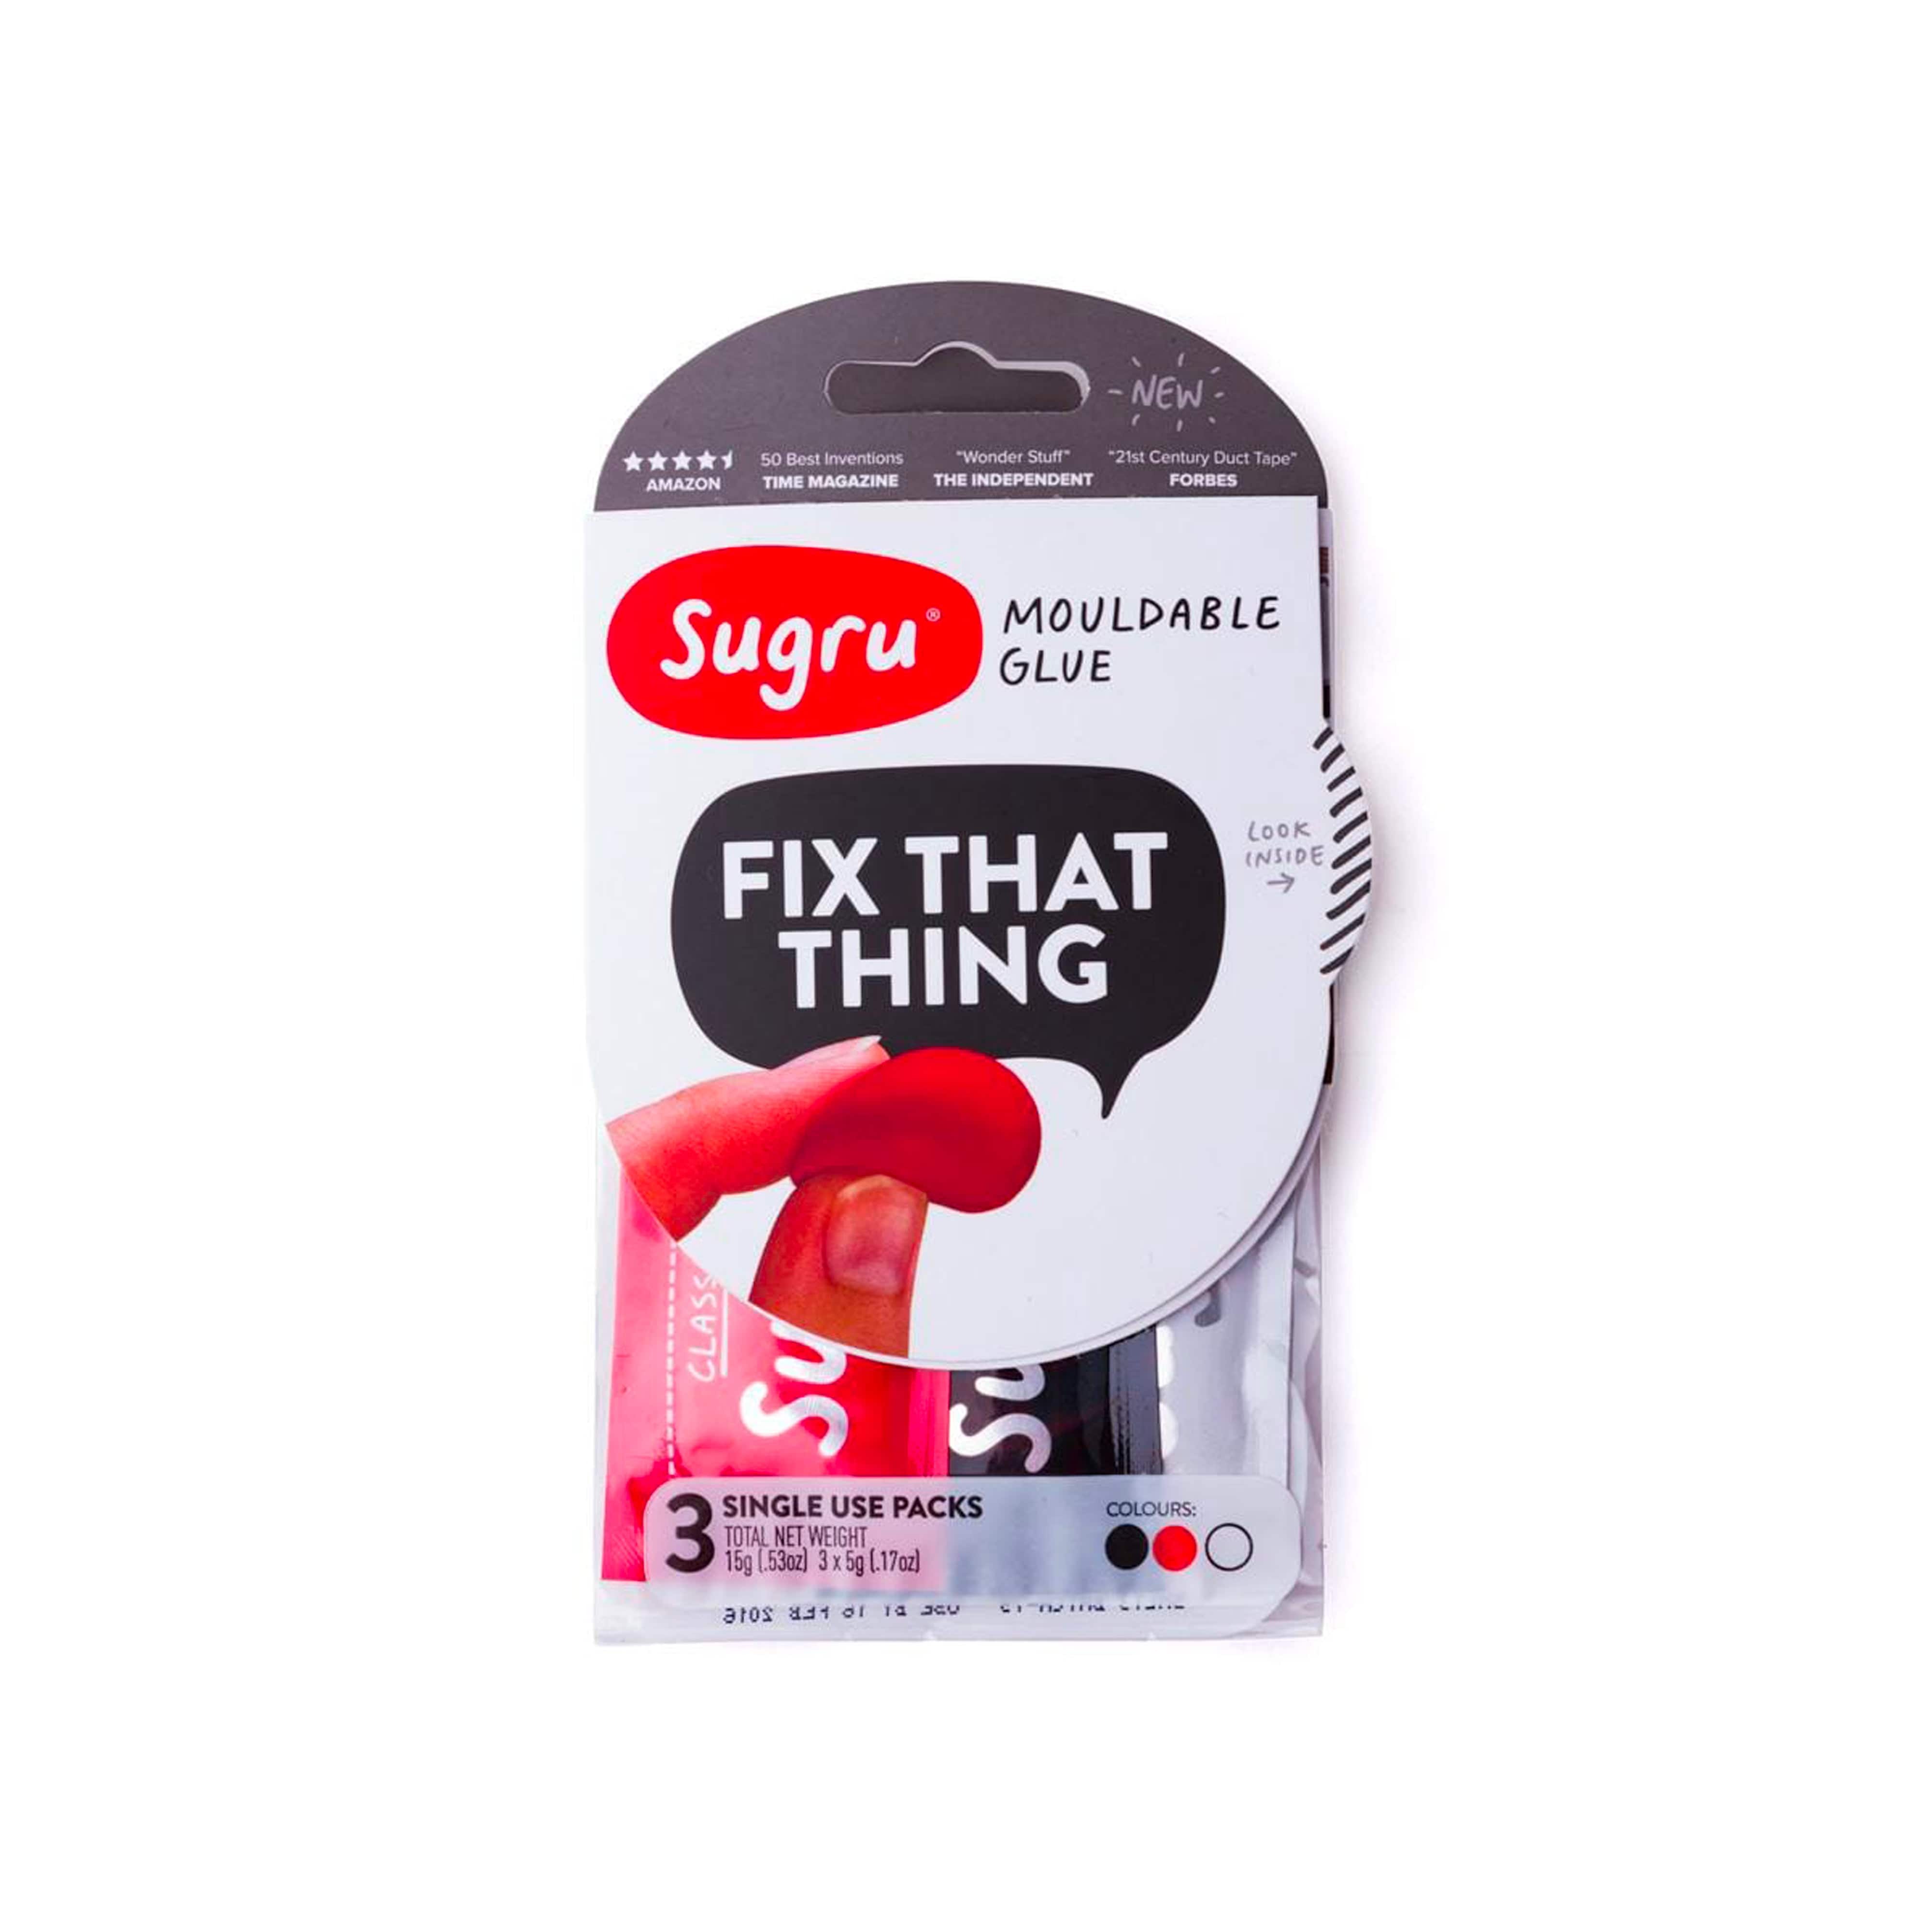 Sugru Mouldable Glue (Organise Small Spaces, Rebel Tech and Create & Craft)  Kits Review - Beauty Cooks Kisses